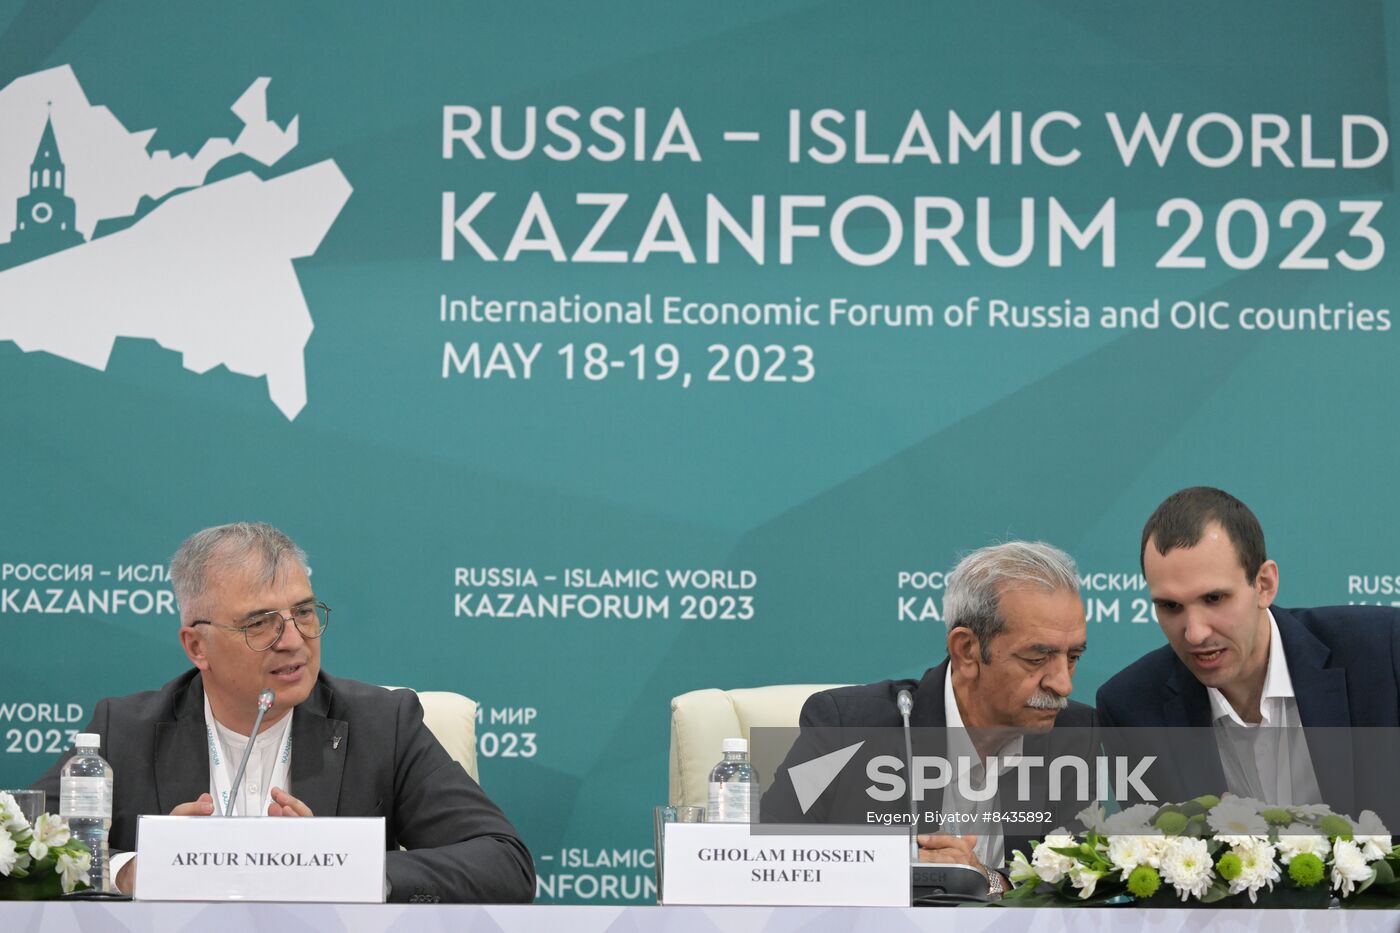 KAZANFORUM 2023. News conference before session, Business Dialogue: Russia - Iran